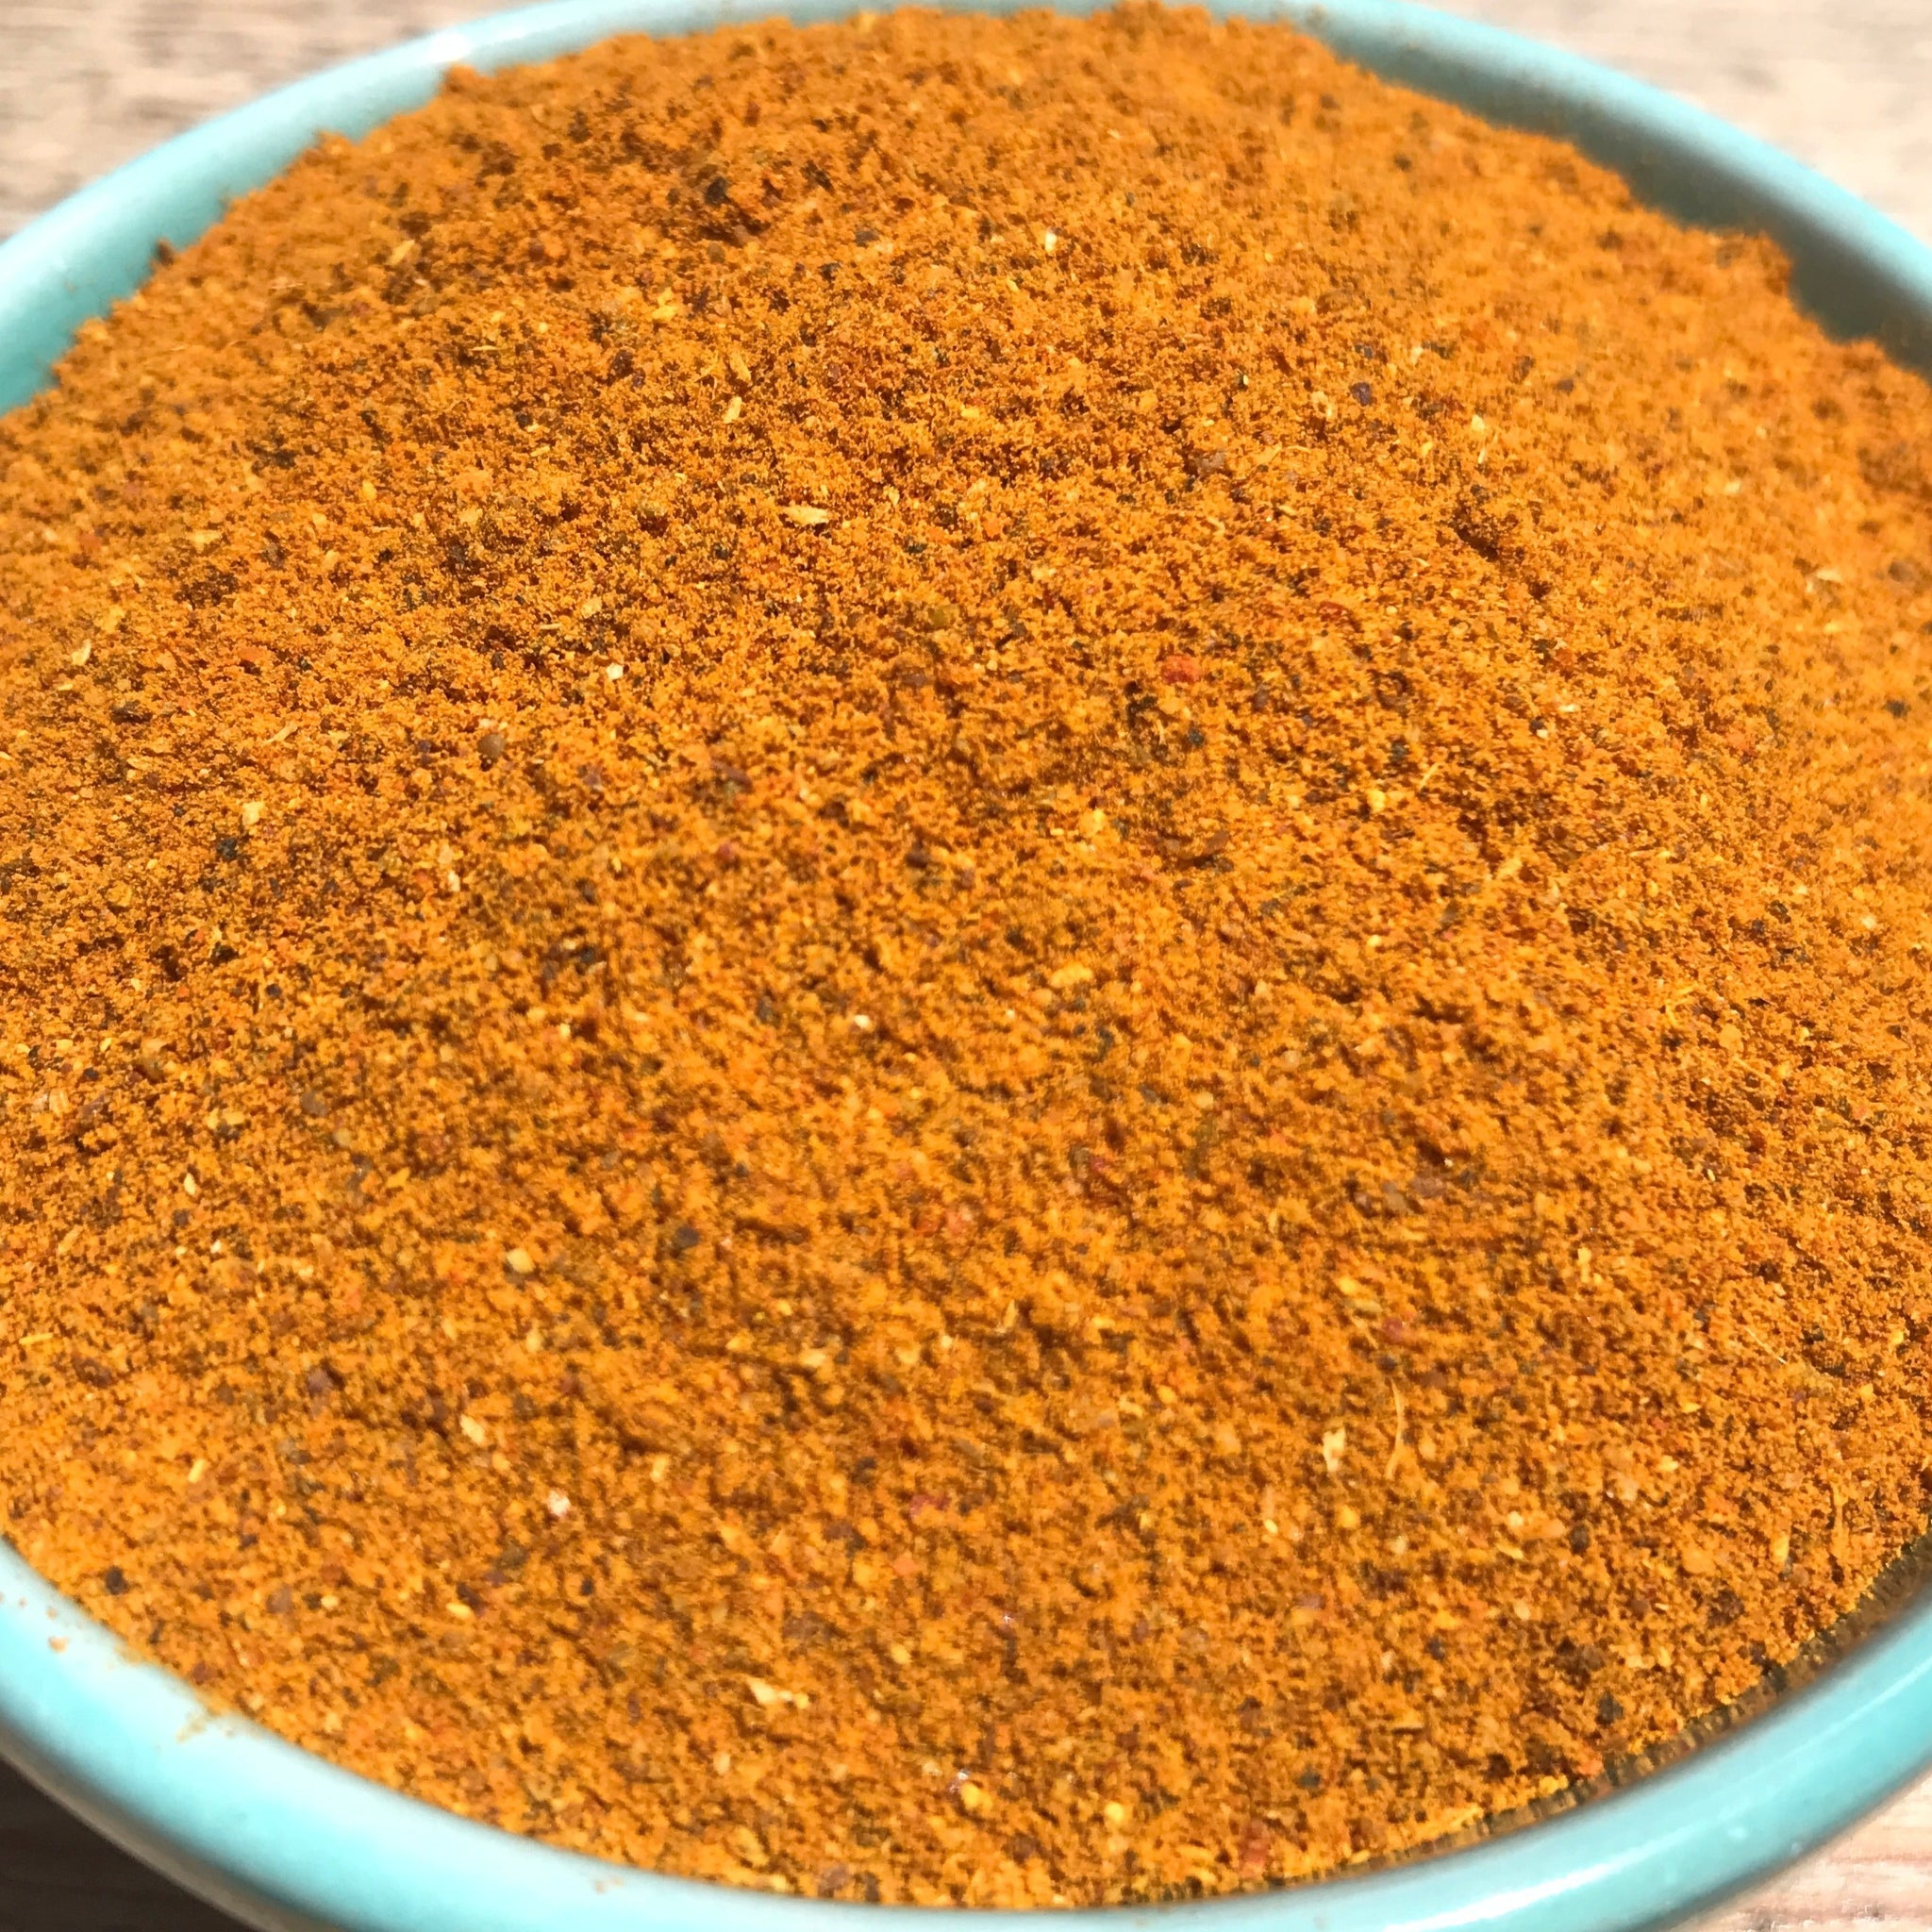 "Hot Curry" Spice Mix